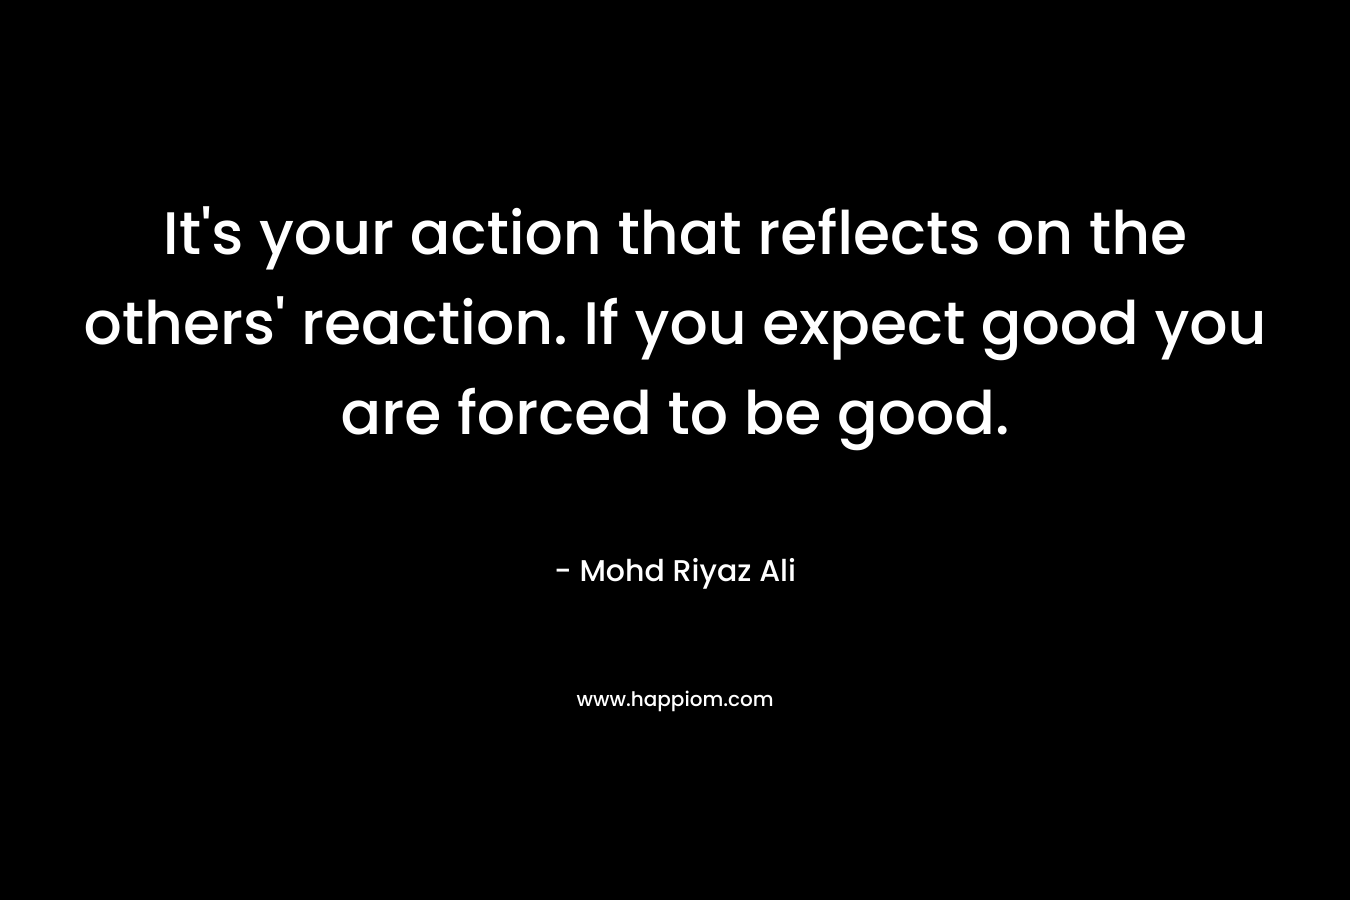 It’s your action that reflects on the others’ reaction. If you expect good you are forced to be good. – Mohd Riyaz Ali